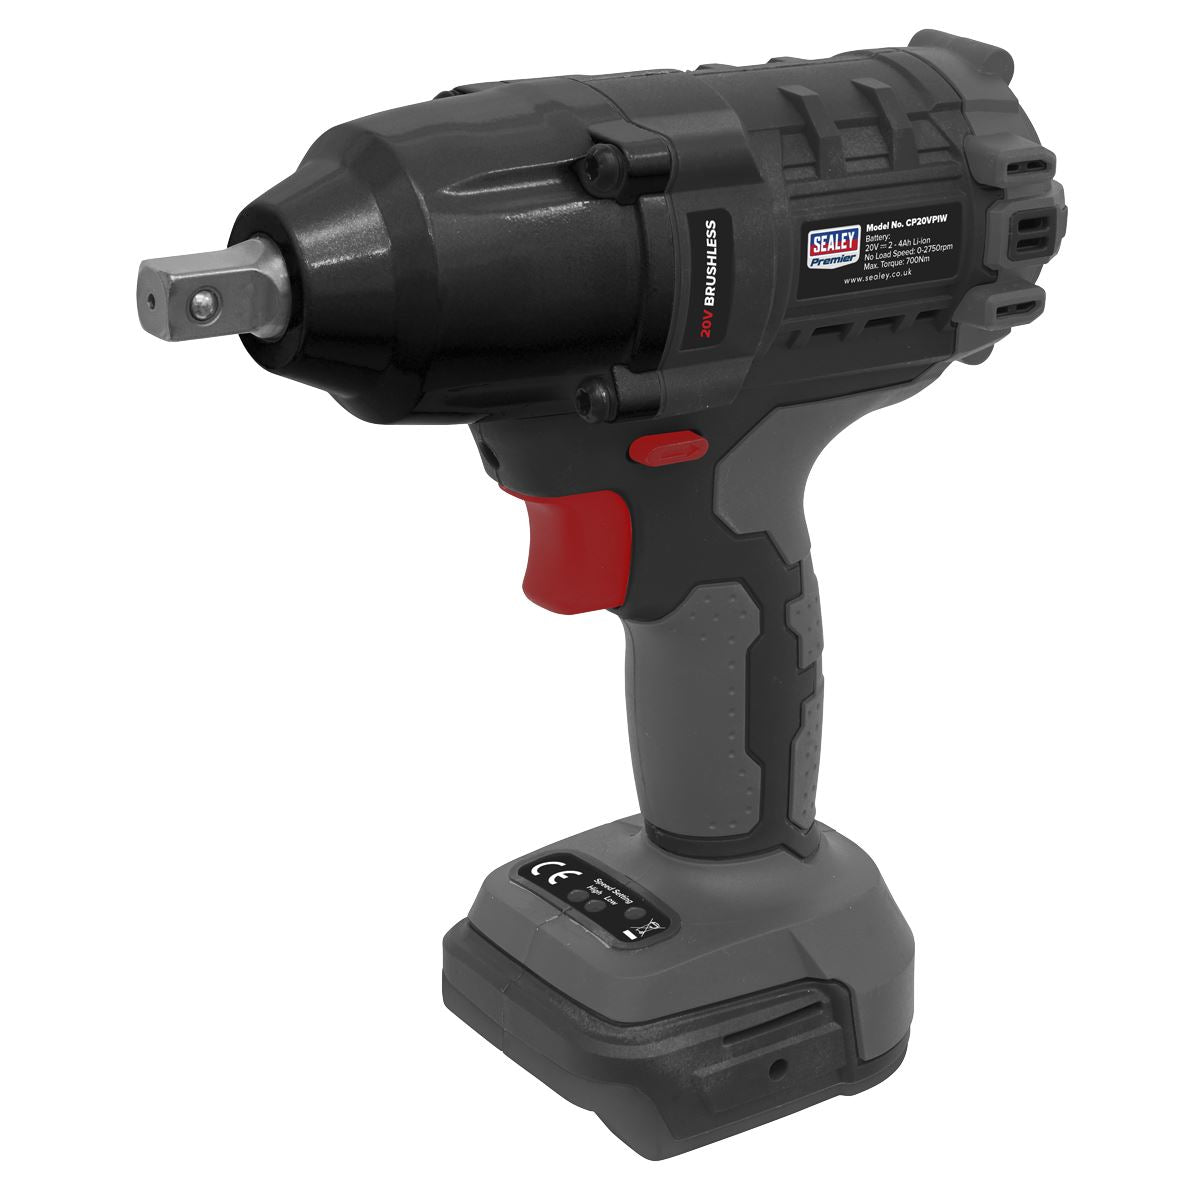 Sealey Cordless Impact Wrench 20V 1/2" Drive Brushless 700Nm Body Only